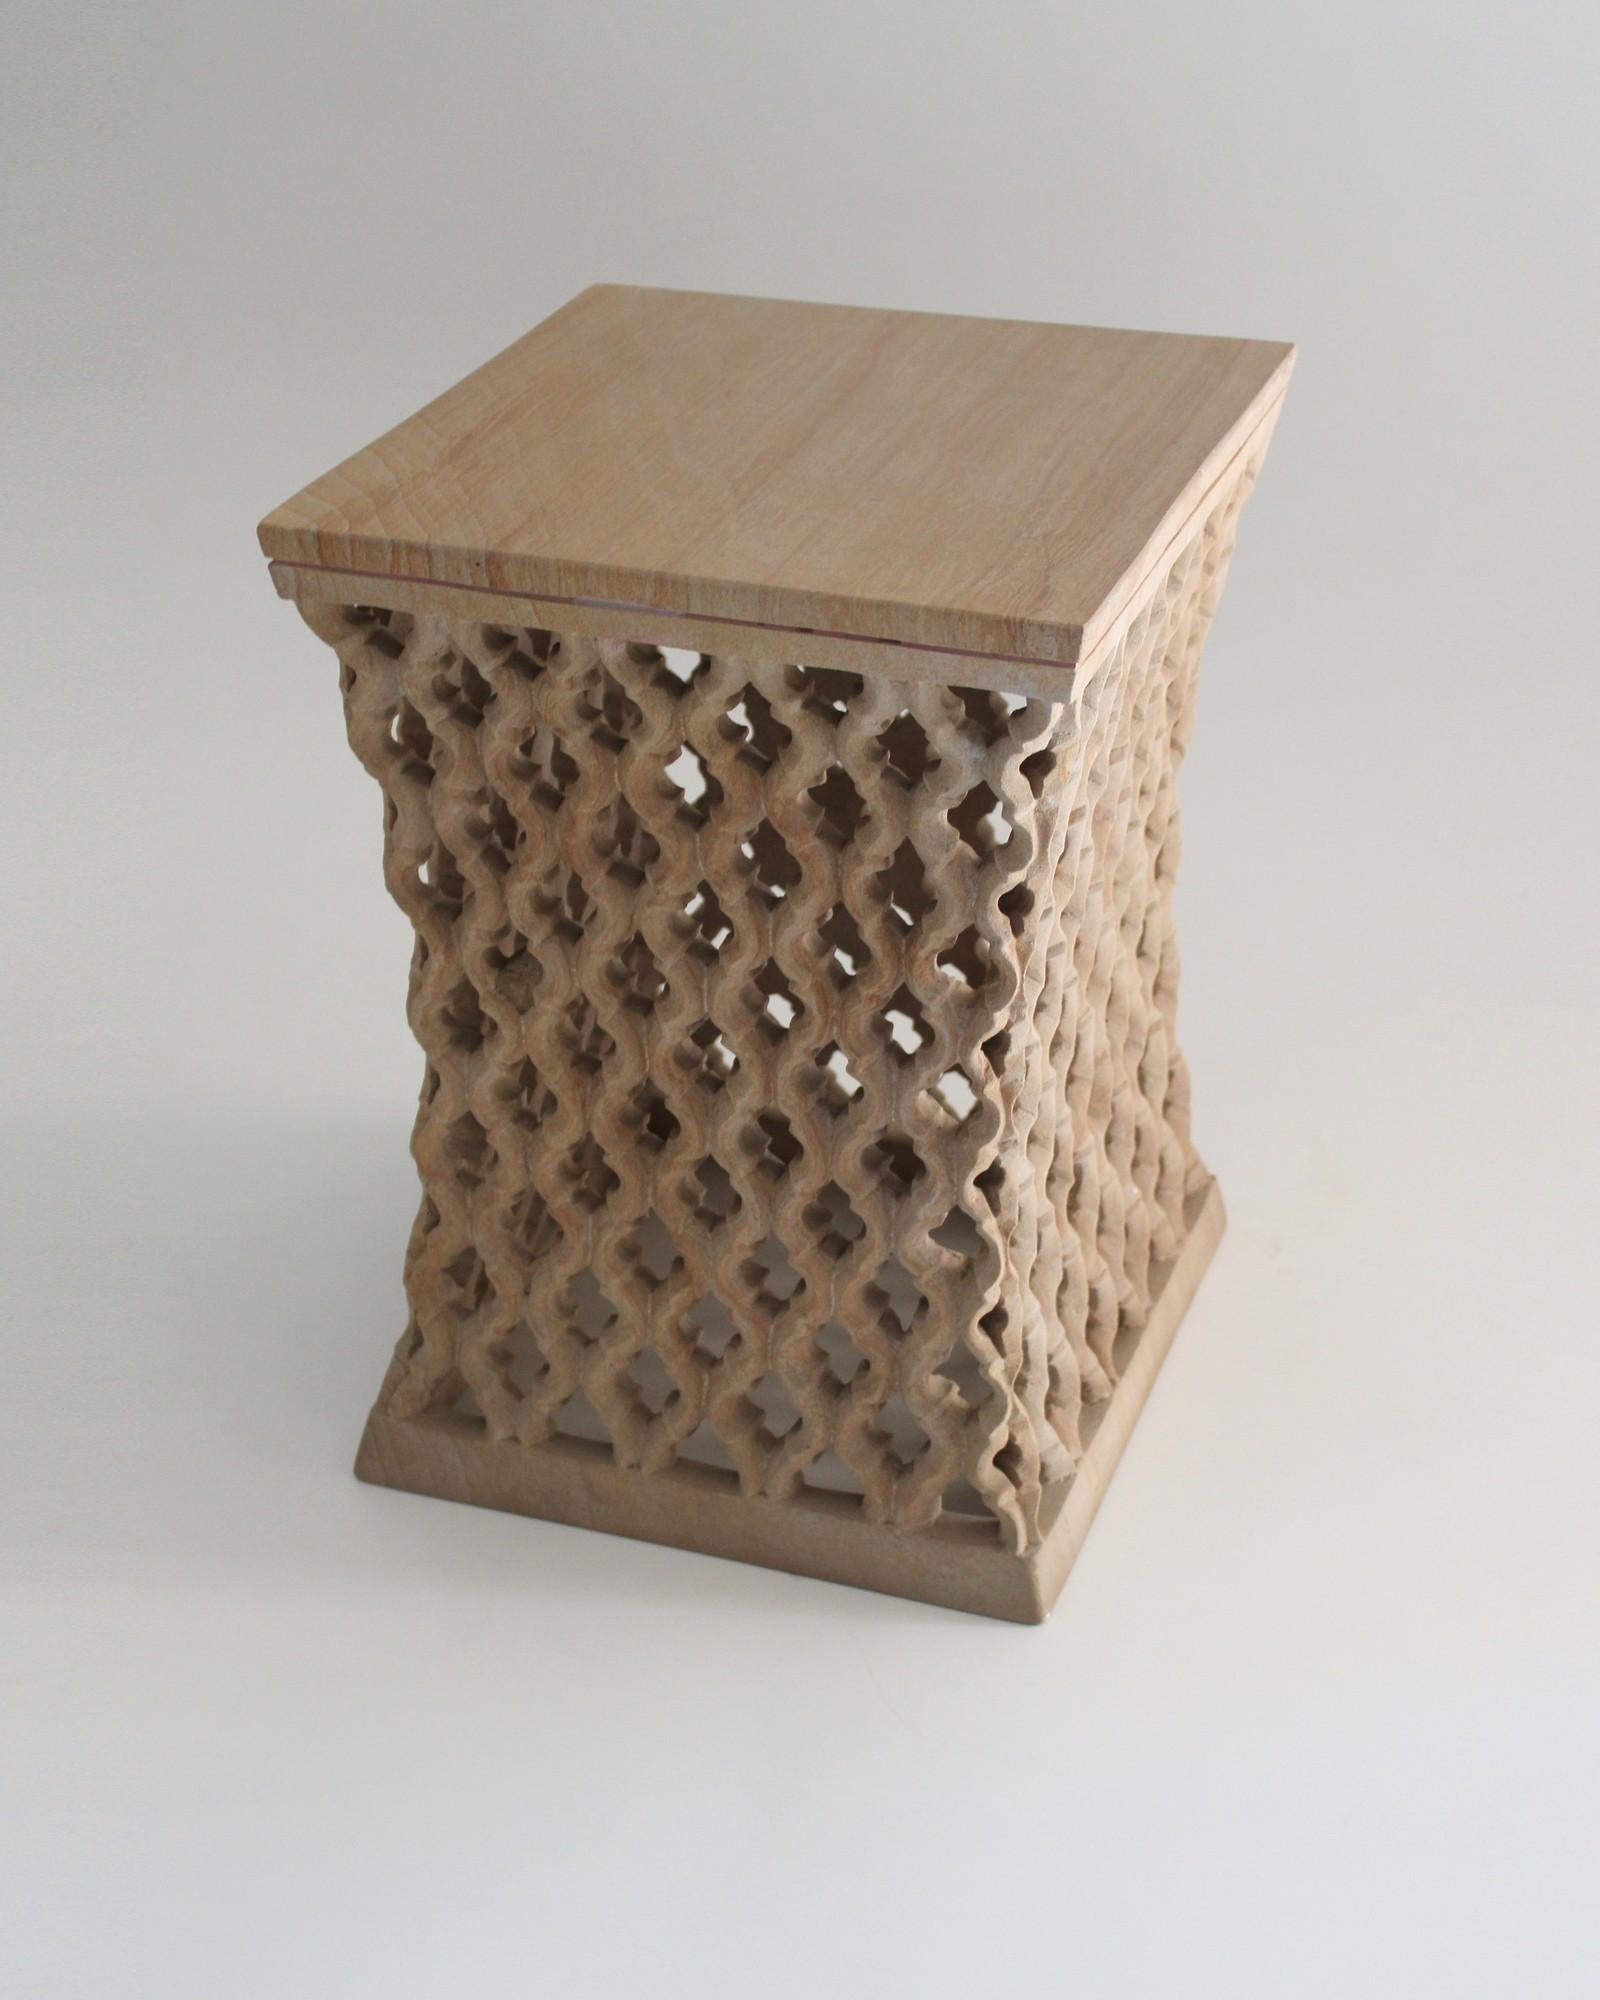 Inspired by the elegant pierced marble “jali” screens and windows he saw in the palaces of Mughal India, the renowned designer Paul Mathieu has created a unique collection of hand-carved side tables. Manufacture: Solid blocks of marble are hollowed